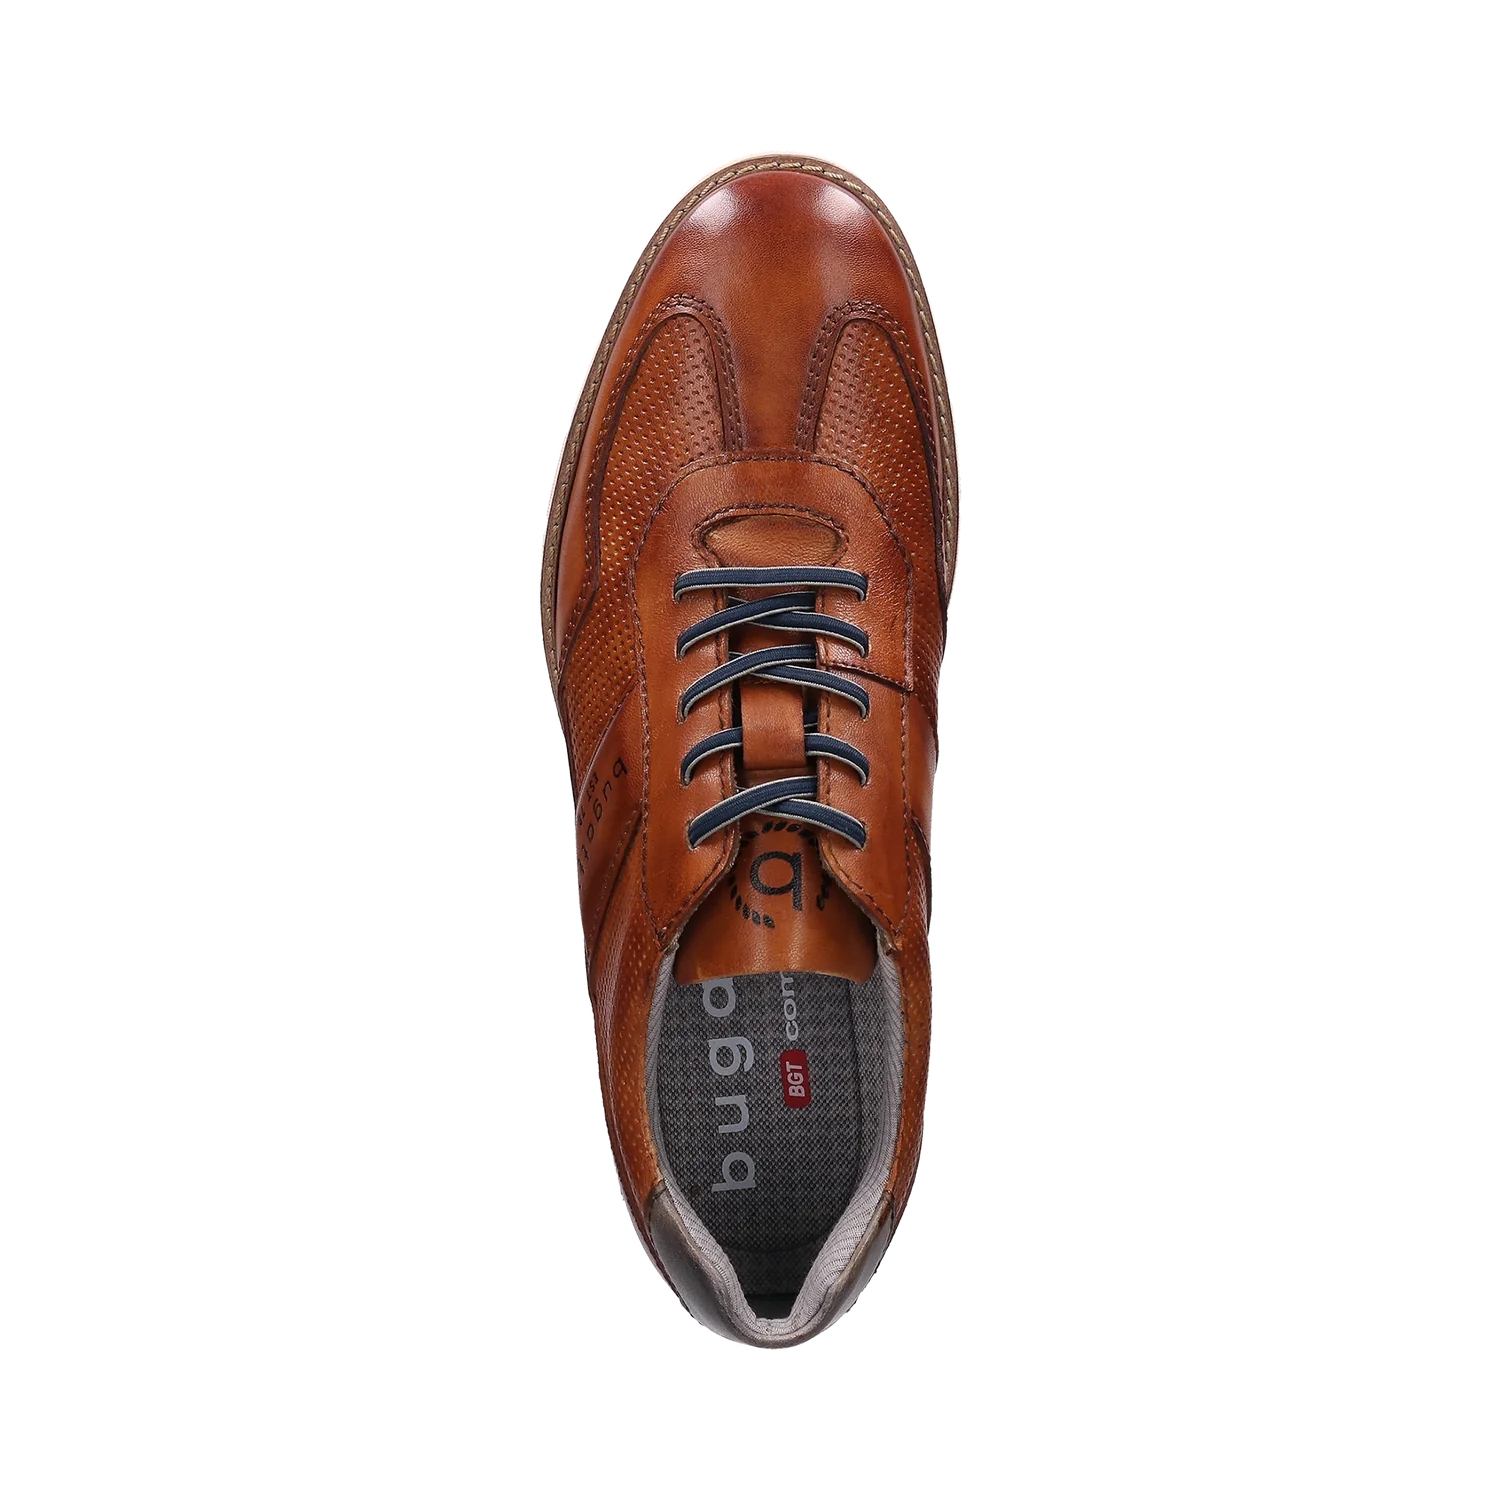 Bugatti Perforated Cognac Leather Lace-Up Shoes